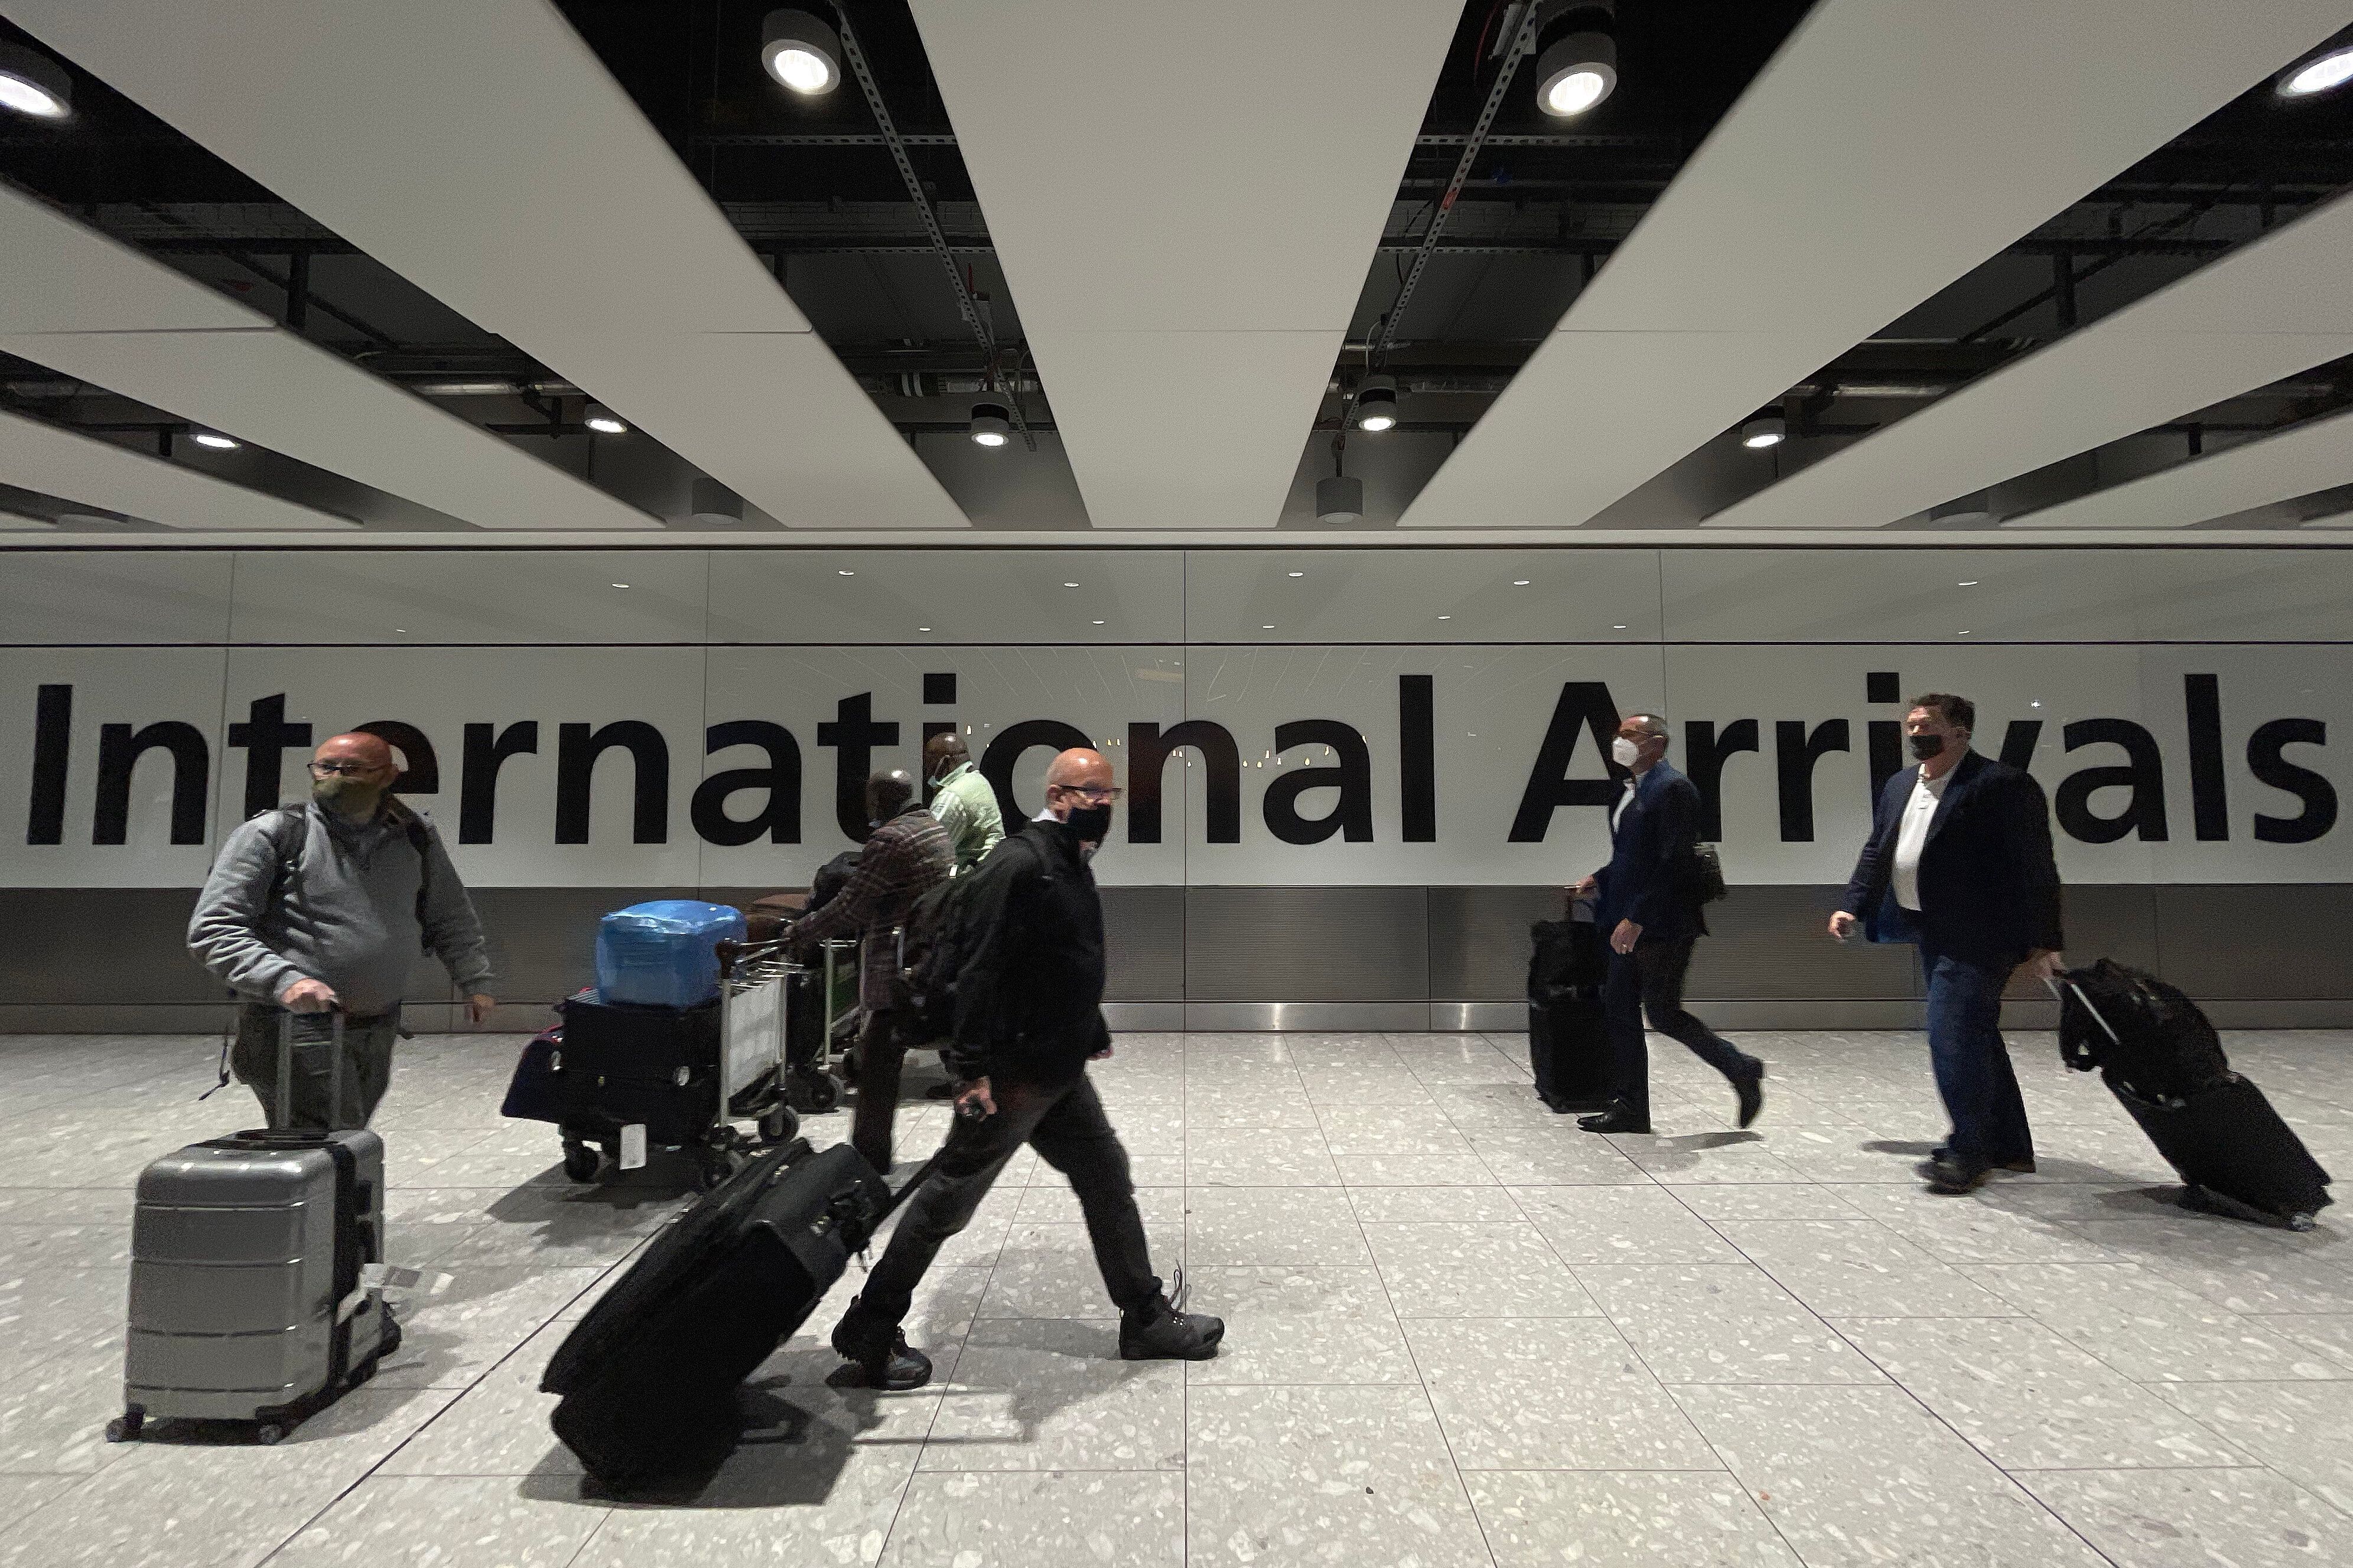 International passengers walk through the arrivals area at Terminal 5 at Heathrow Airport on November 26, 2021 in London, England. (Photo by Leon Neal/Getty Images)